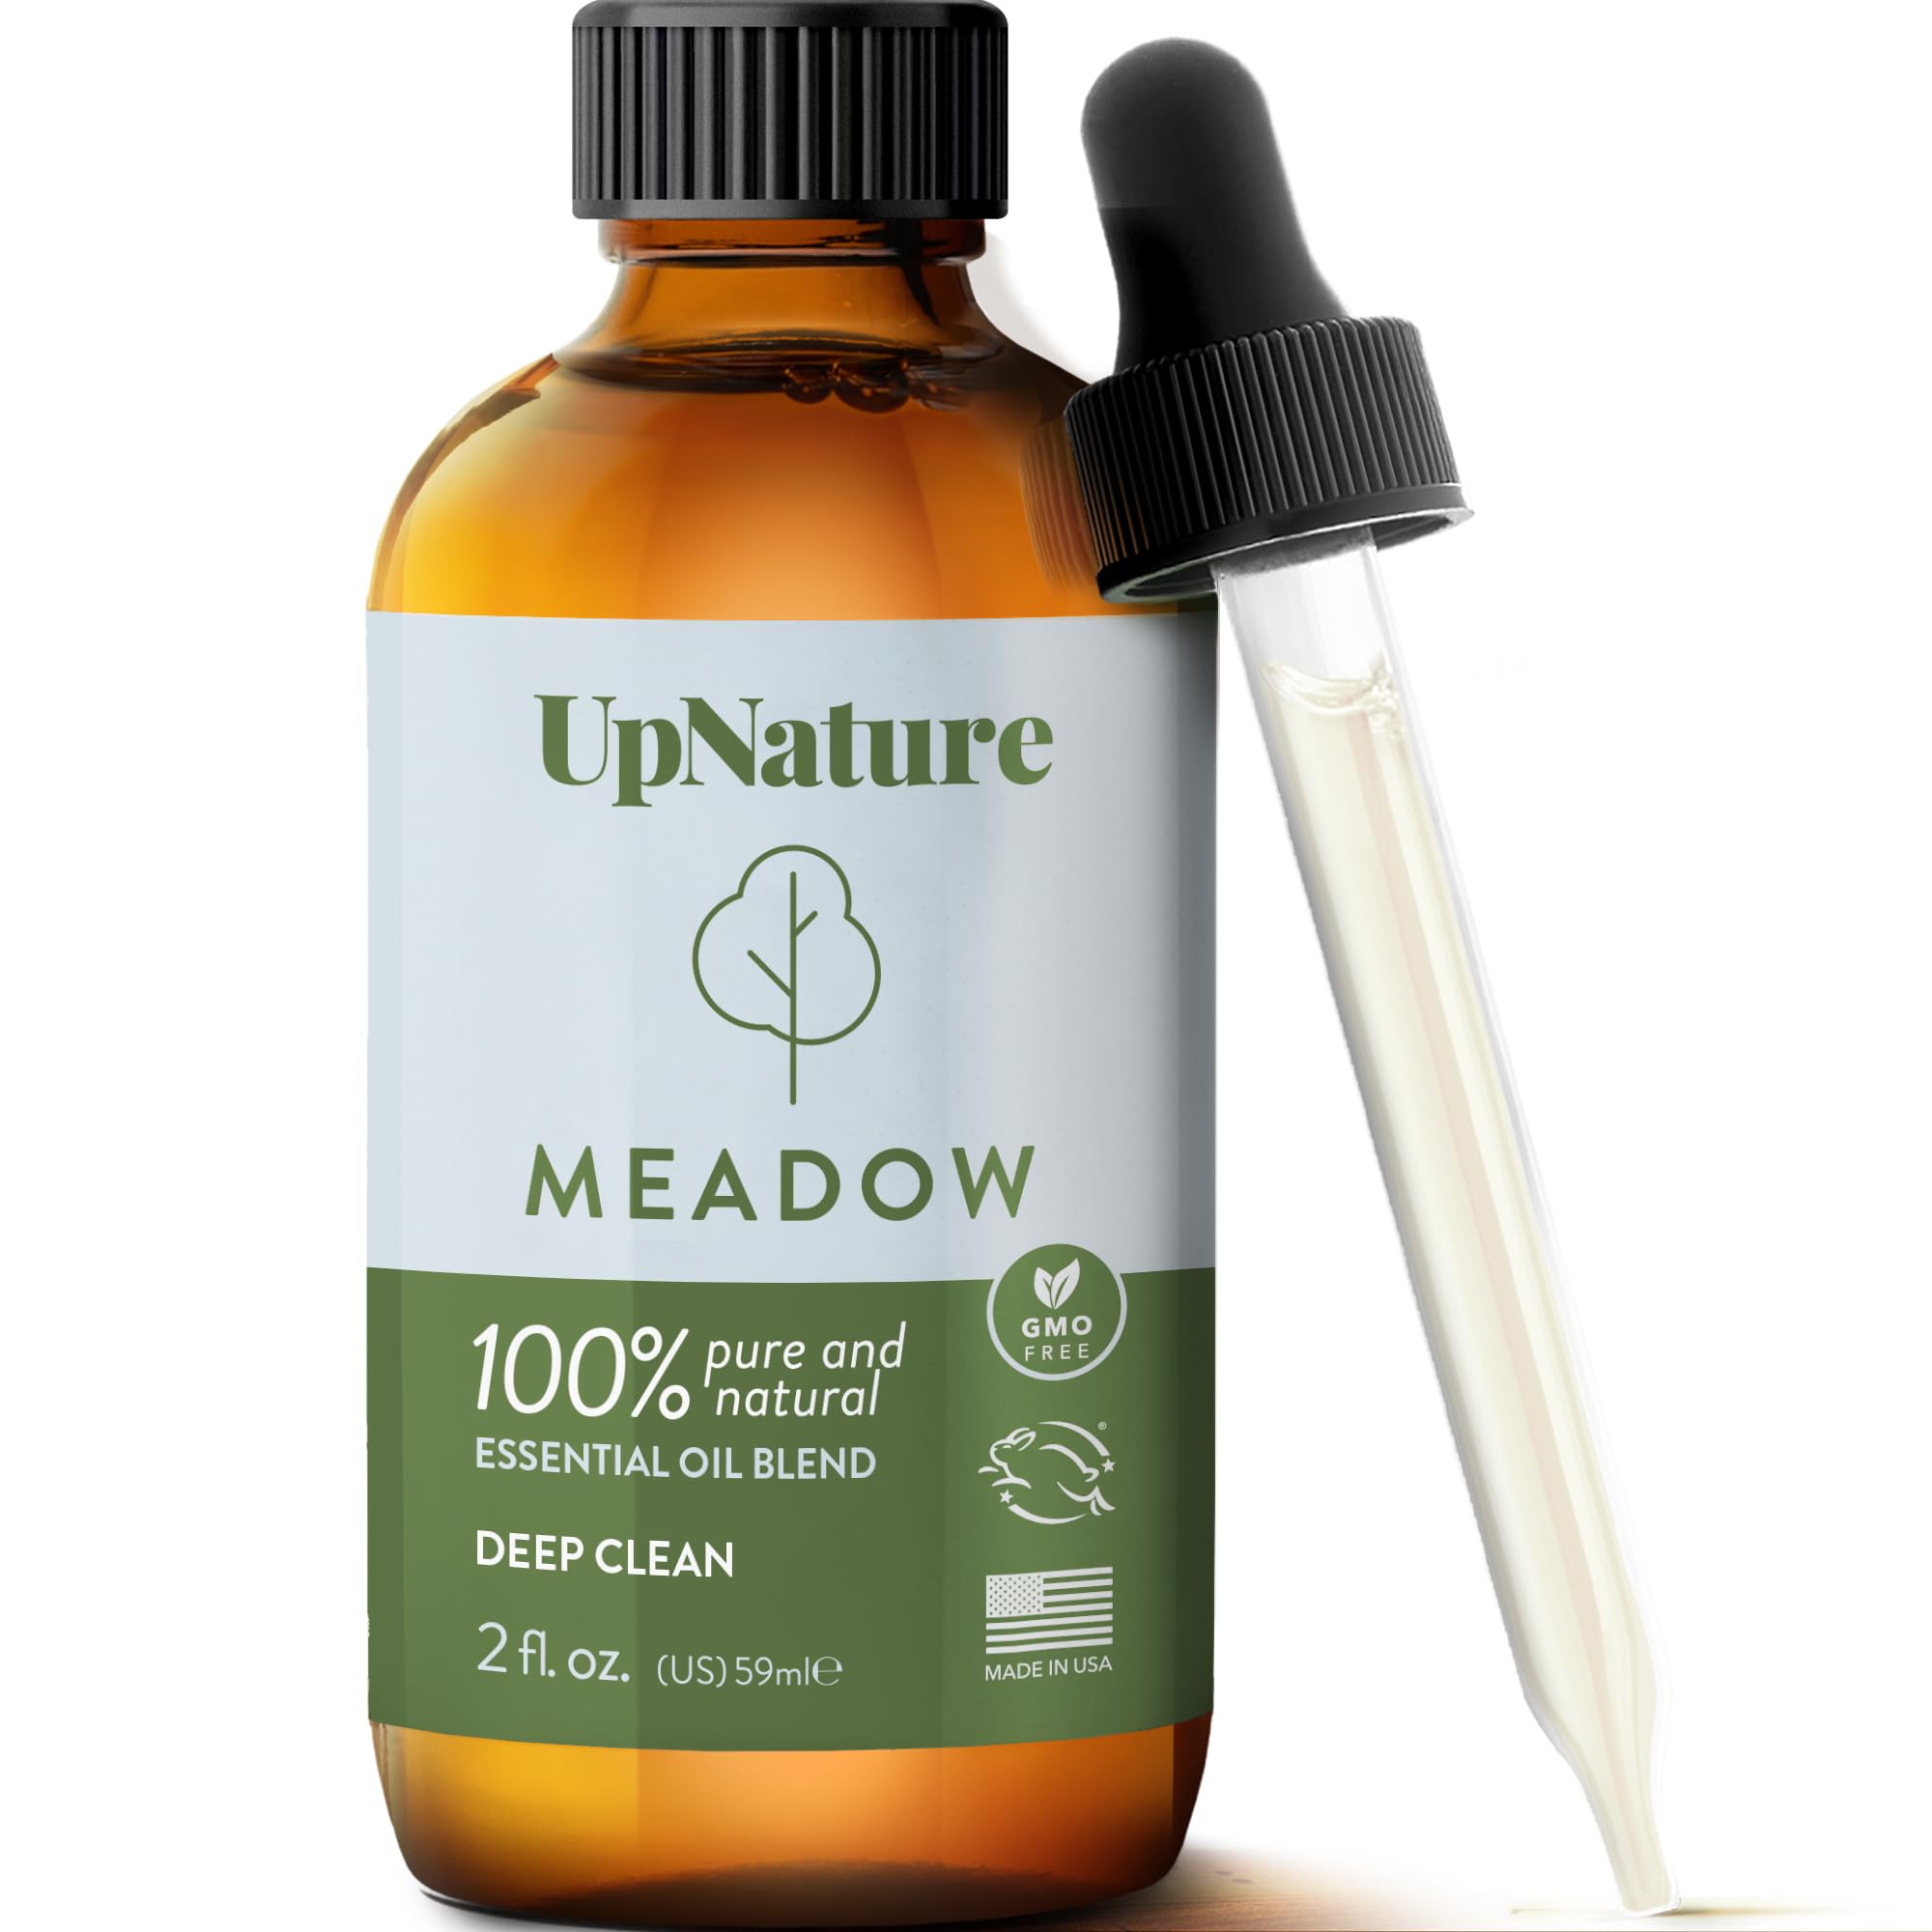 Meadow Essential Oil Blend 2oz - Natural Household All Purpose Cleaning Blend, Floral & Fresh Linen Essential Oil with Lavender Essential Oil, Ylang-Ylang Essential Oil & Eucalyptus Essential Oil